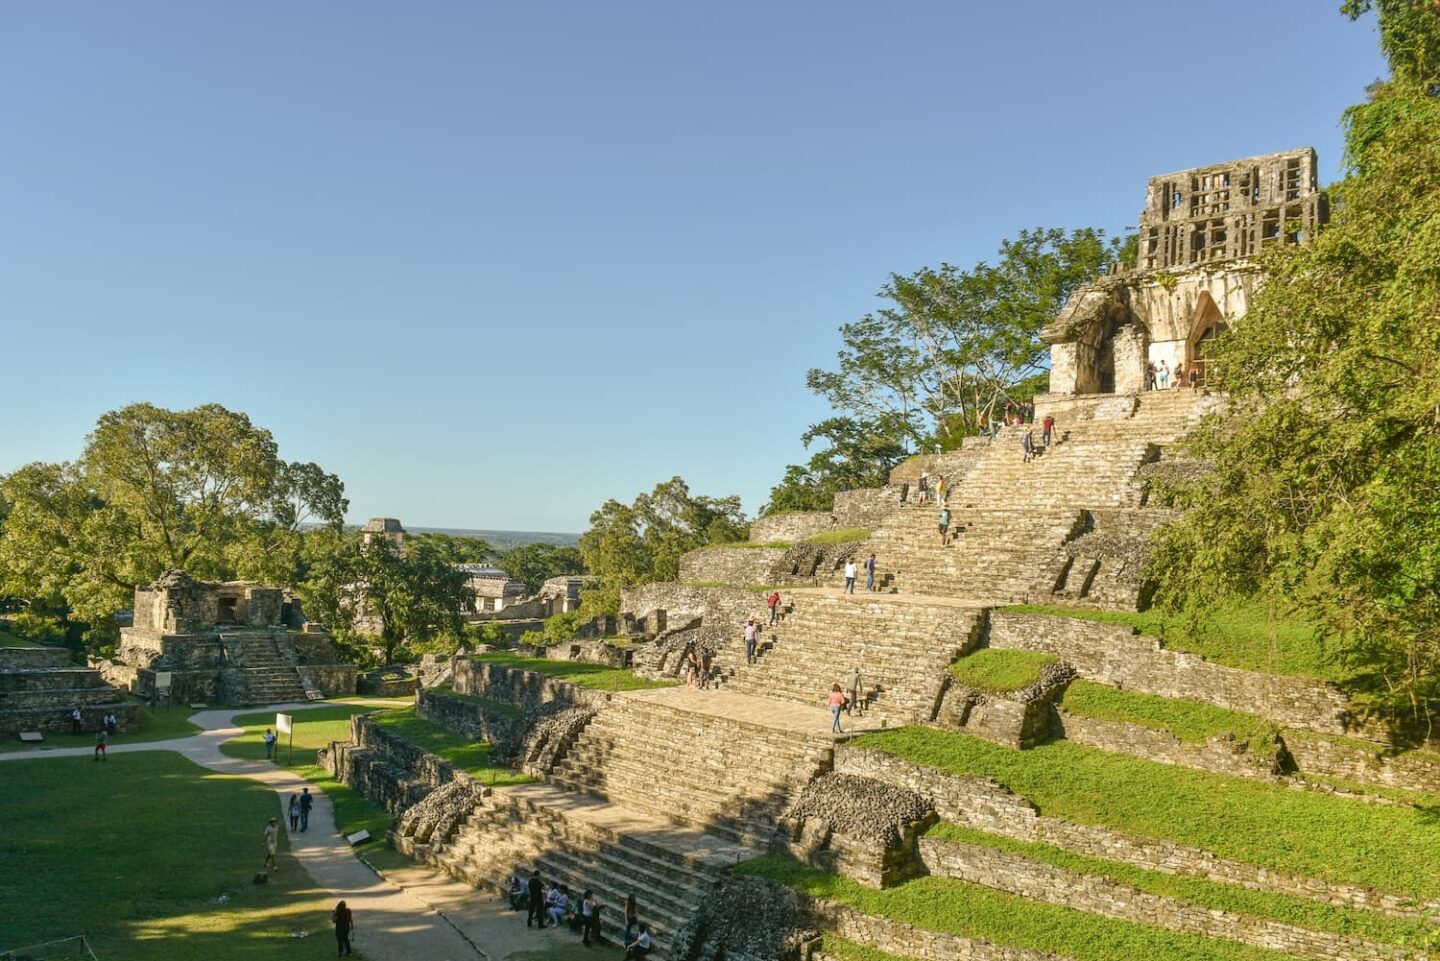 During your 3 week Mexico itinerary stop at Palenque.